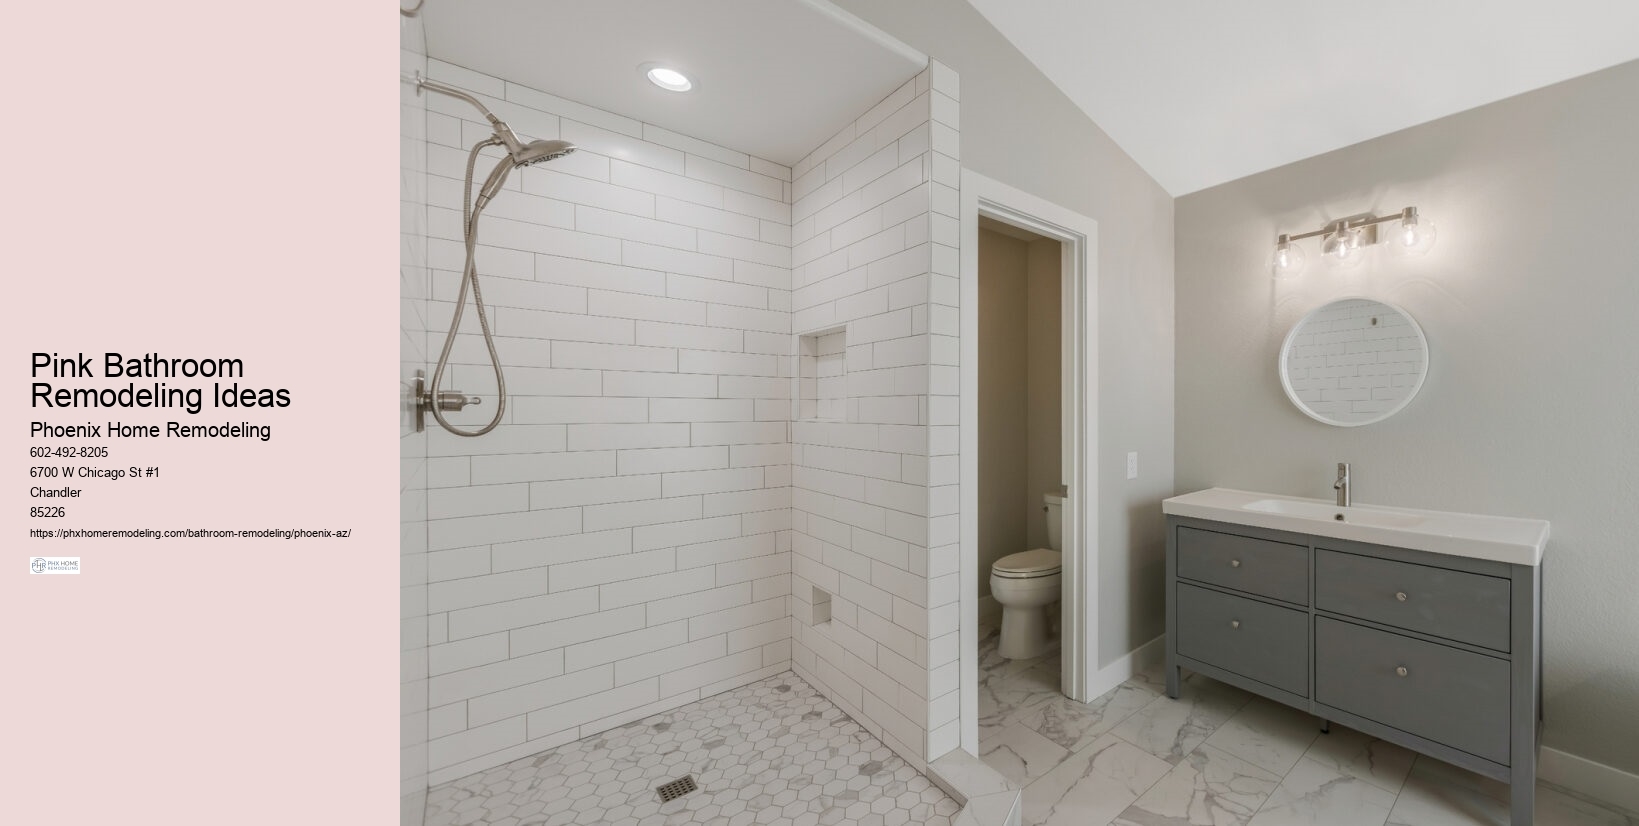 Should you replace drywall when remodeling a bathroom